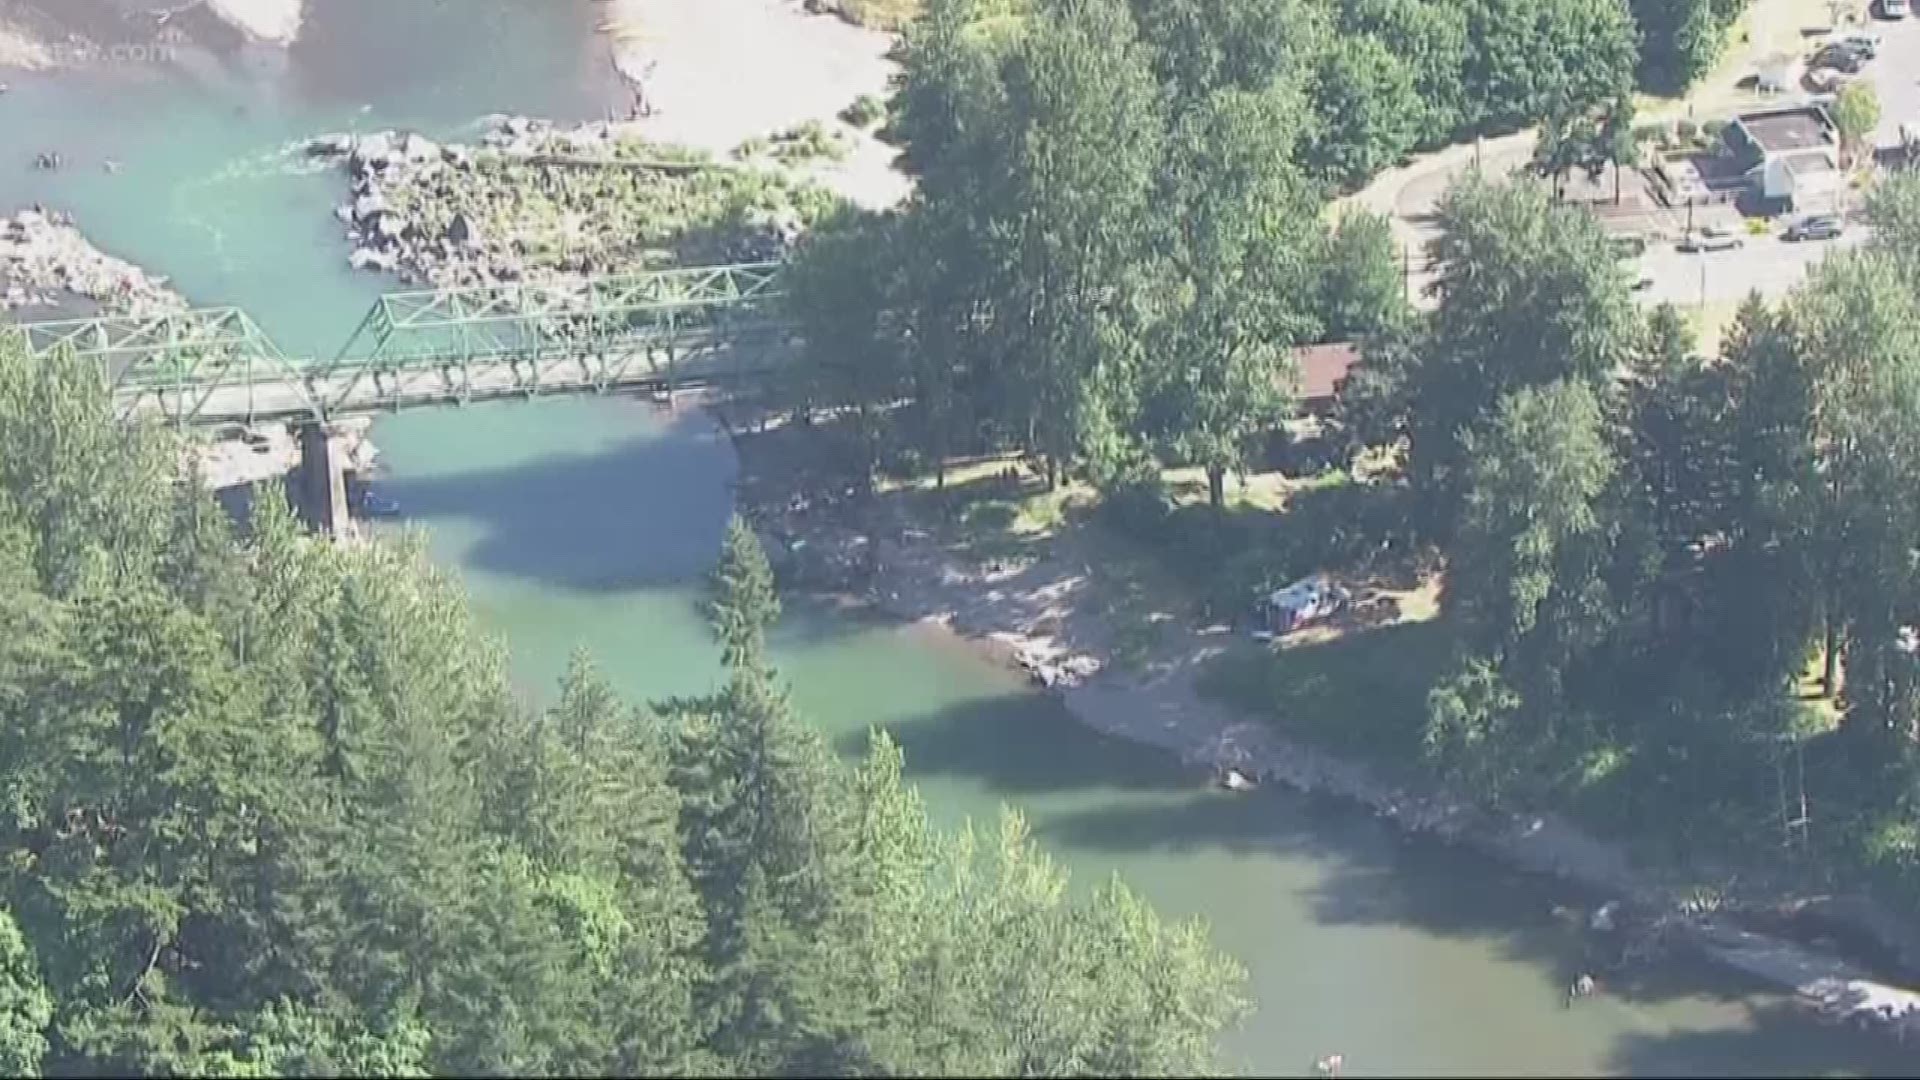 A person was pulled out of the river and rushed to a hospital.